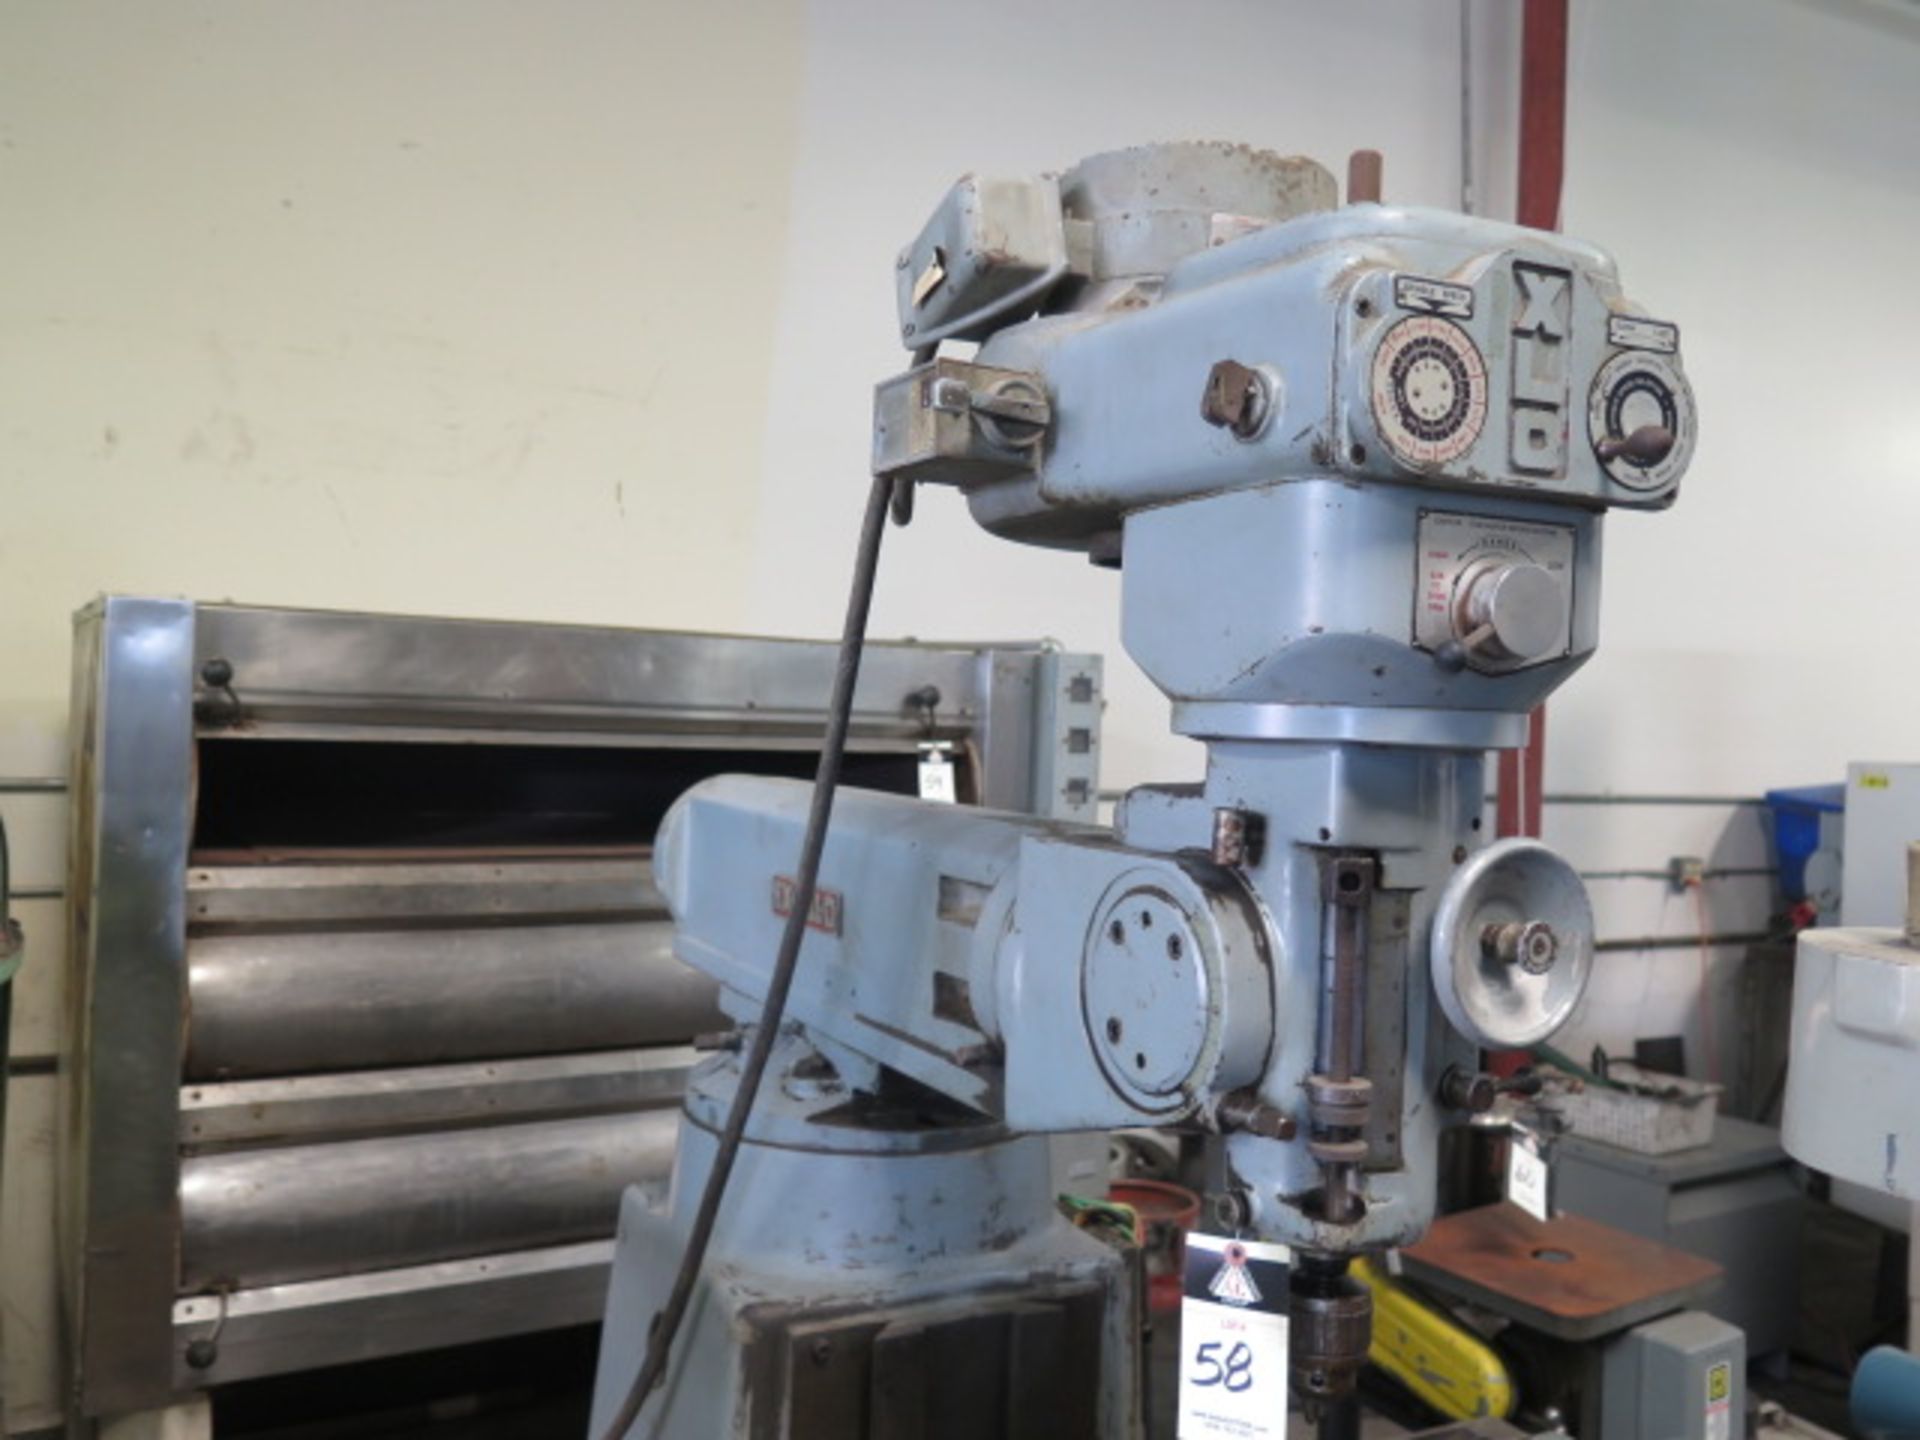 Ex-Cell-O Vertical Mill w/ 100-3800 Dial Change RPM, R8 SpdL, Power Feed, 9” x 36” Table, SOLD AS IS - Image 3 of 7